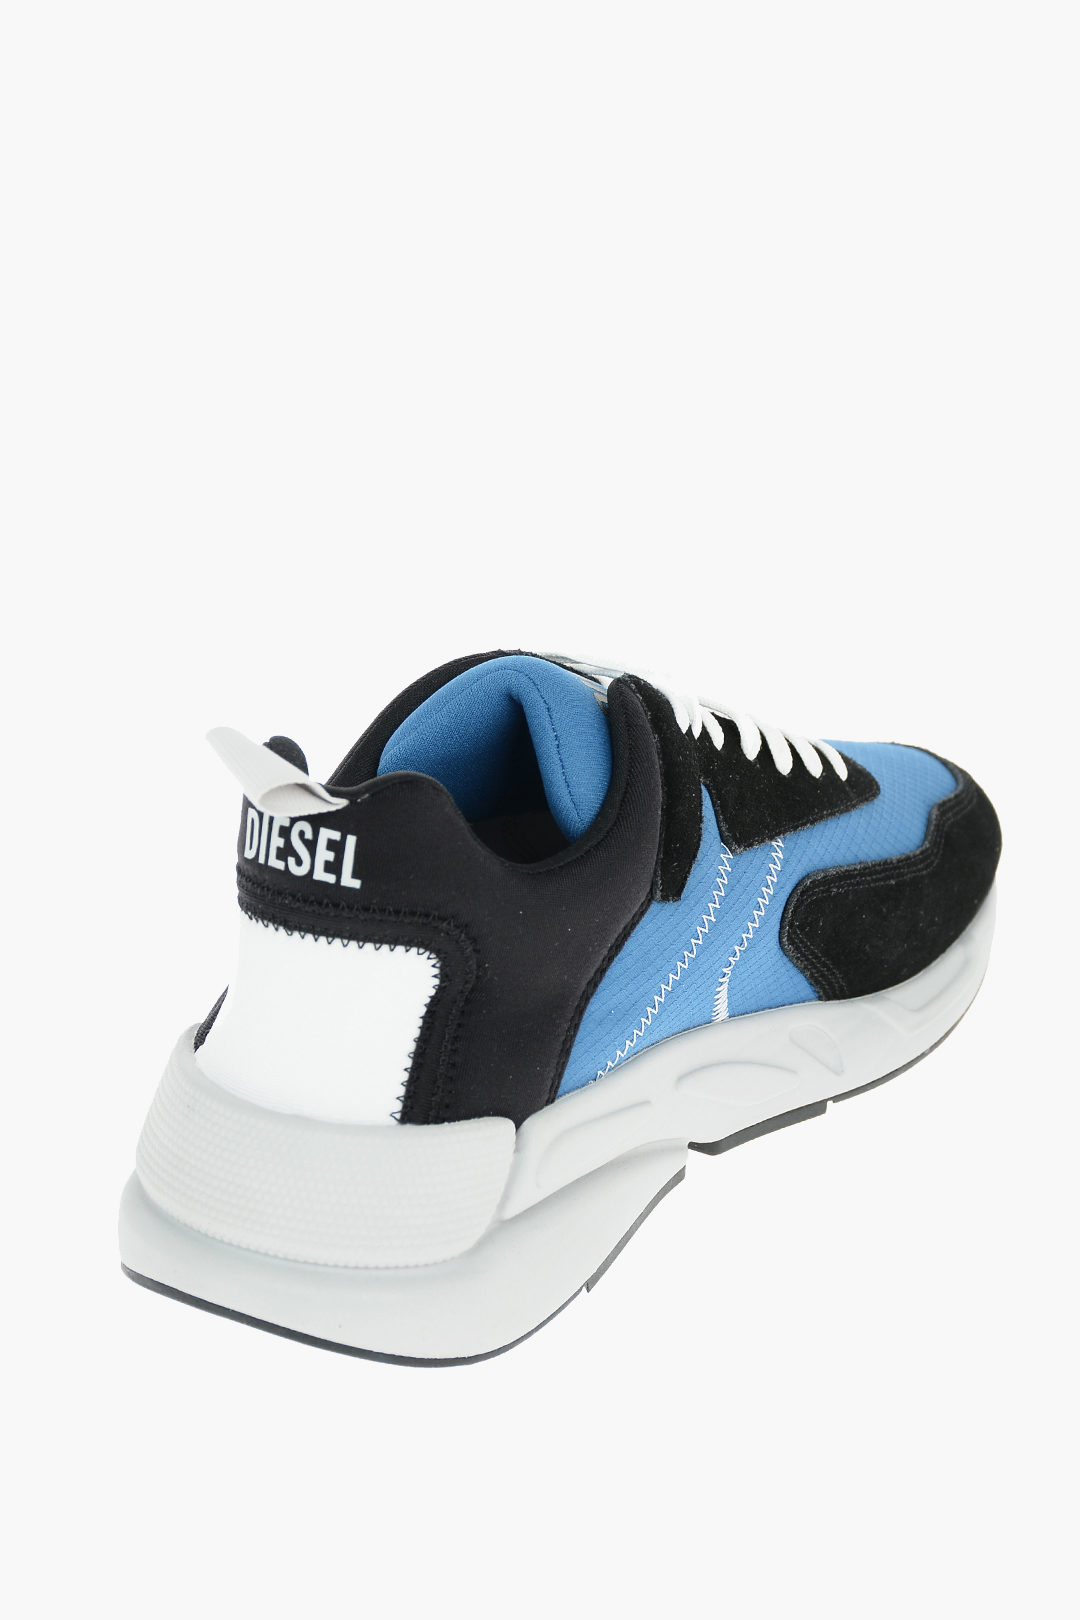 Diesel two-tone S-SERENDIPITY LOW CUT sneakers men - Glamood Outlet